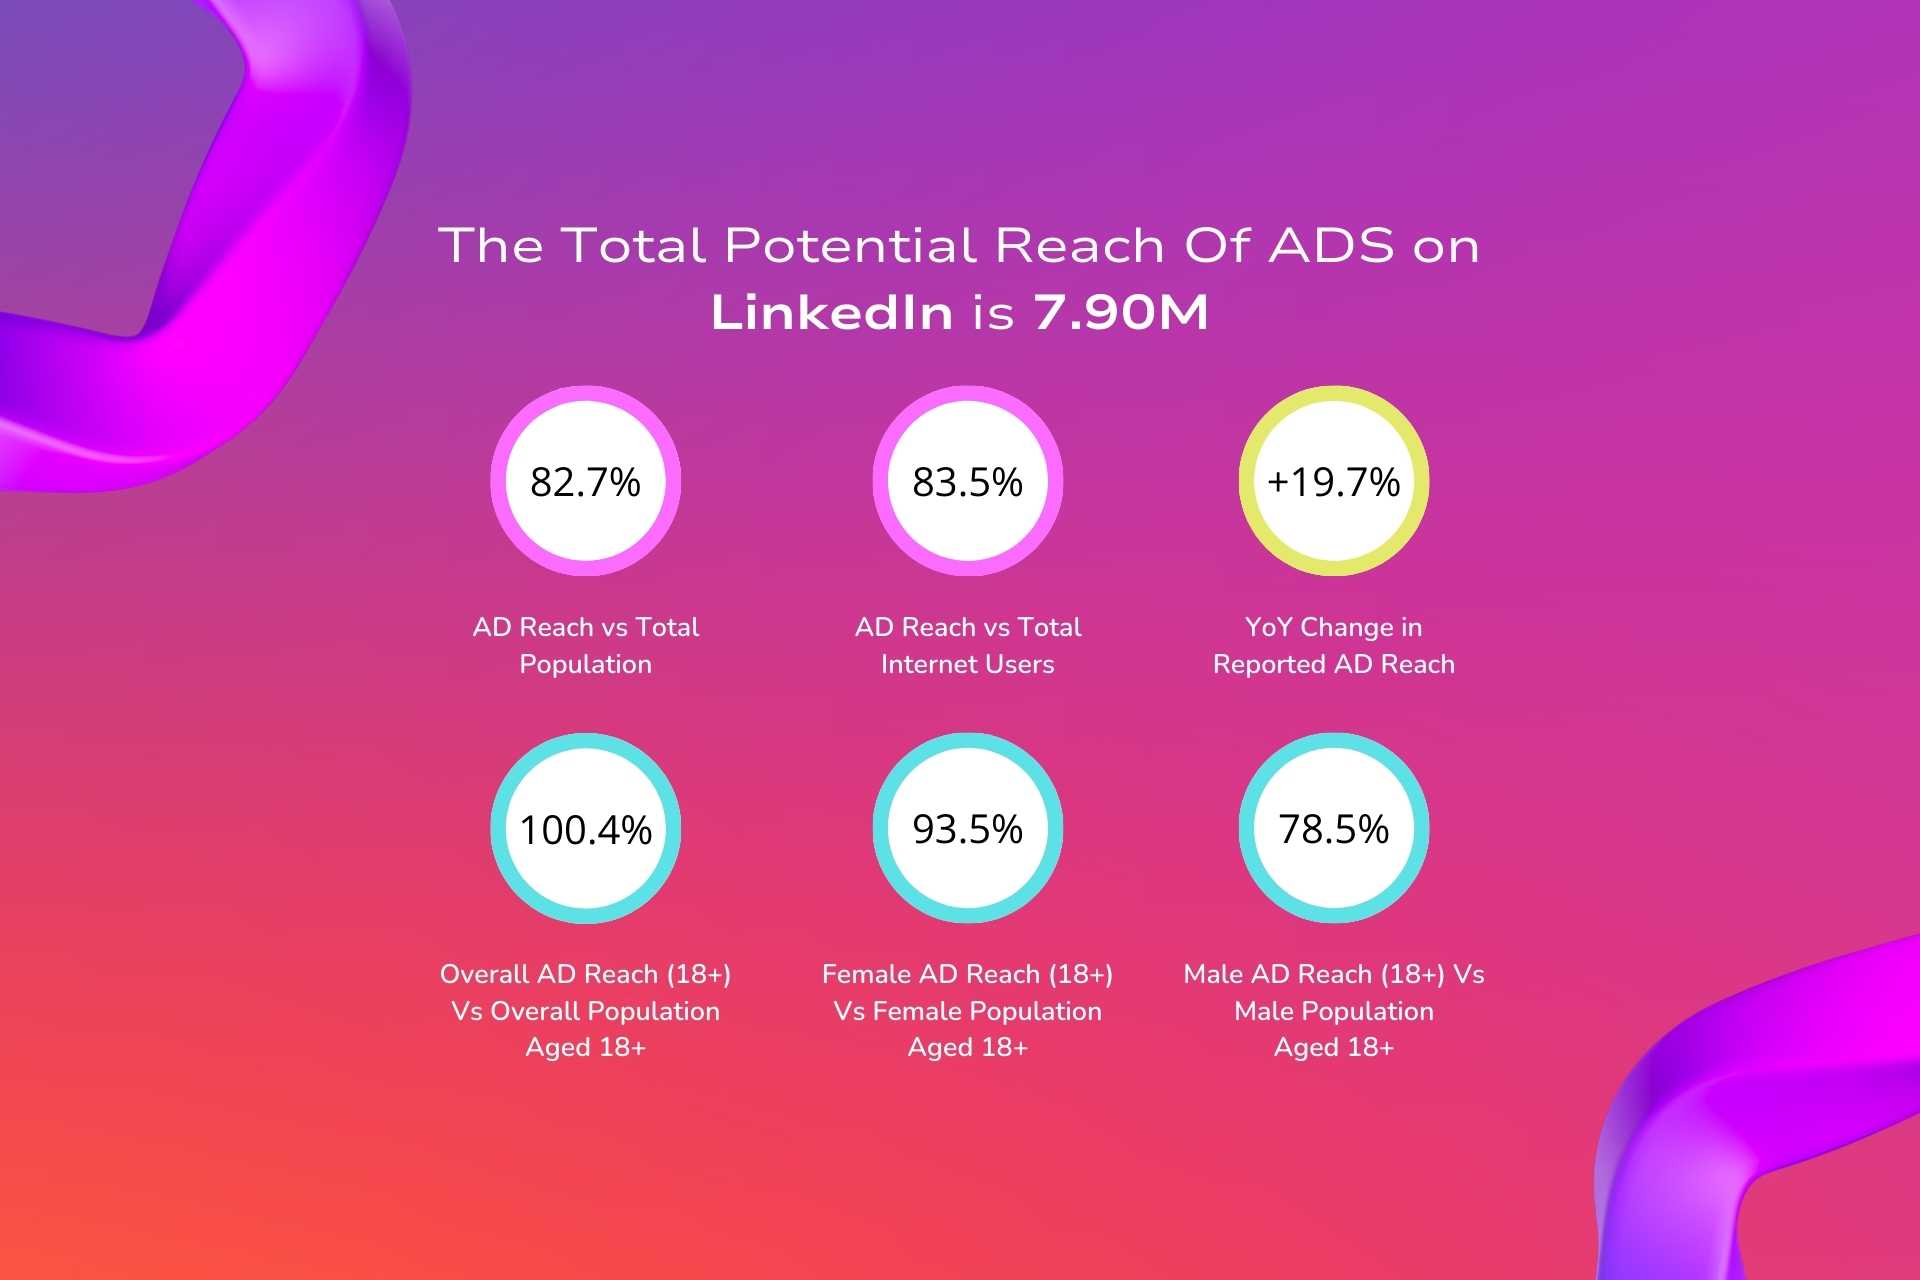 Growth of Social Media in the UAE -ADS on LinkedIn